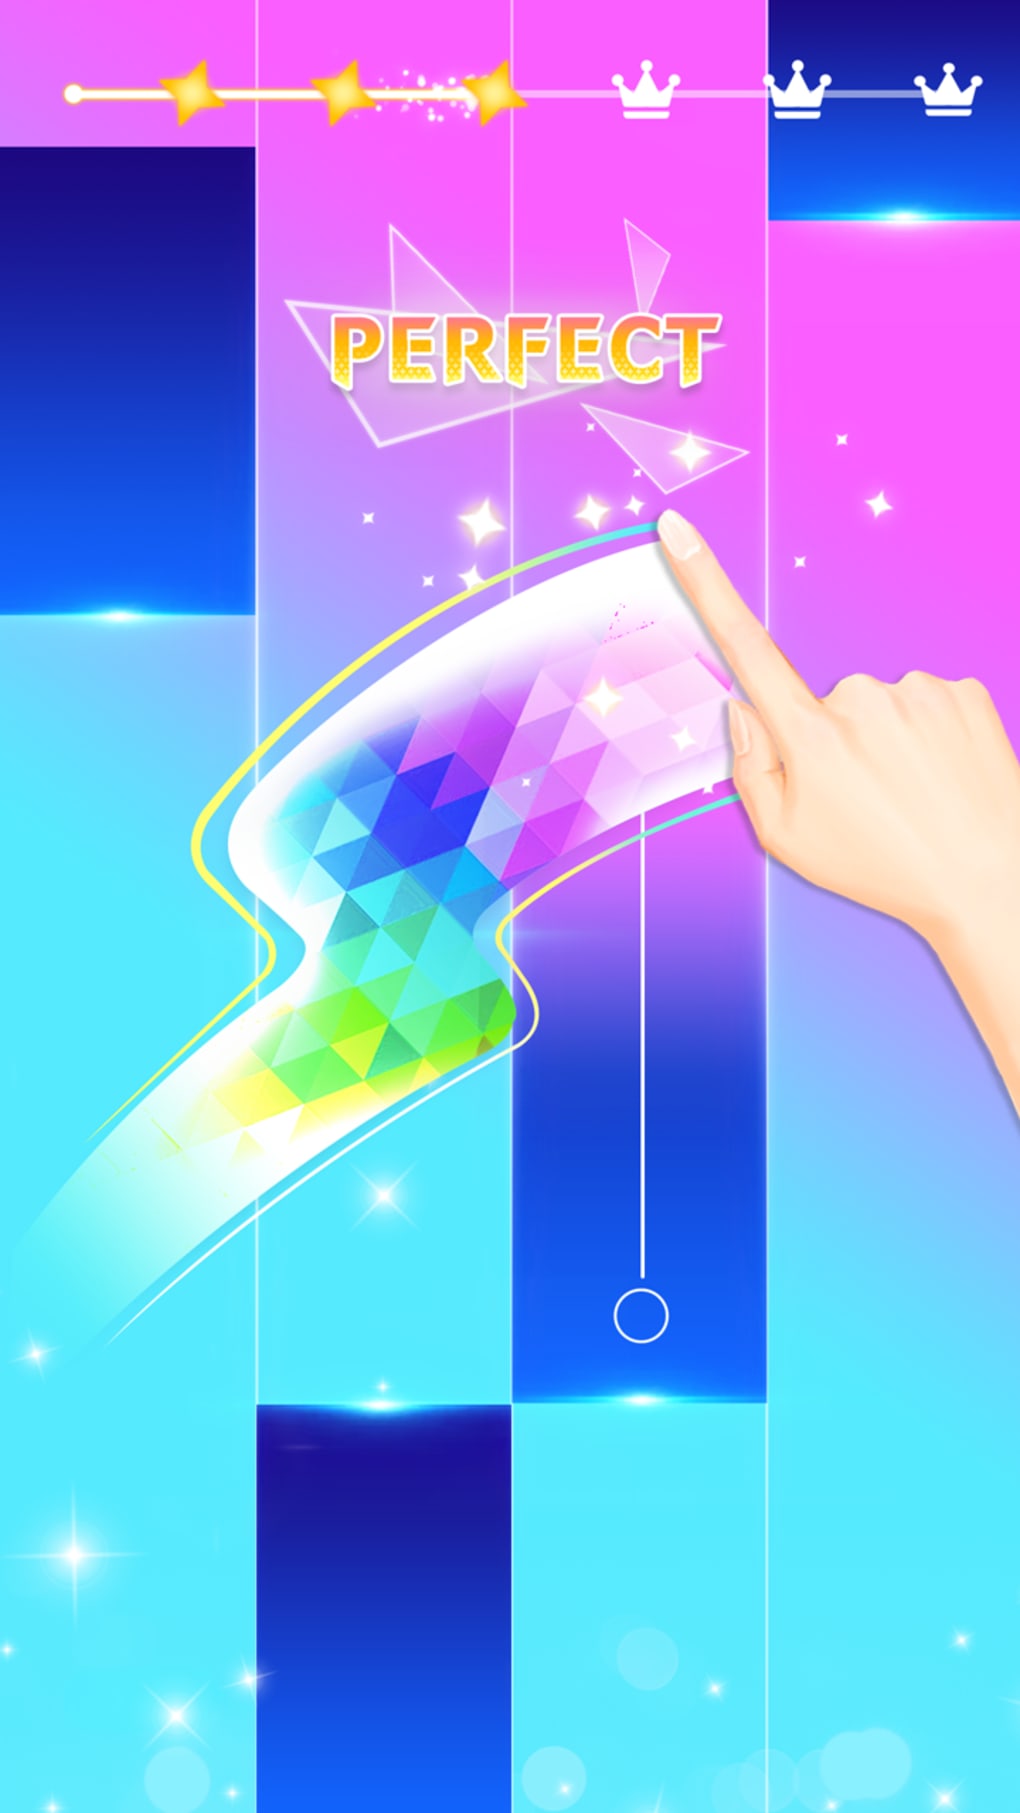 Magic Music Tiles - Piano music game for Android - Download